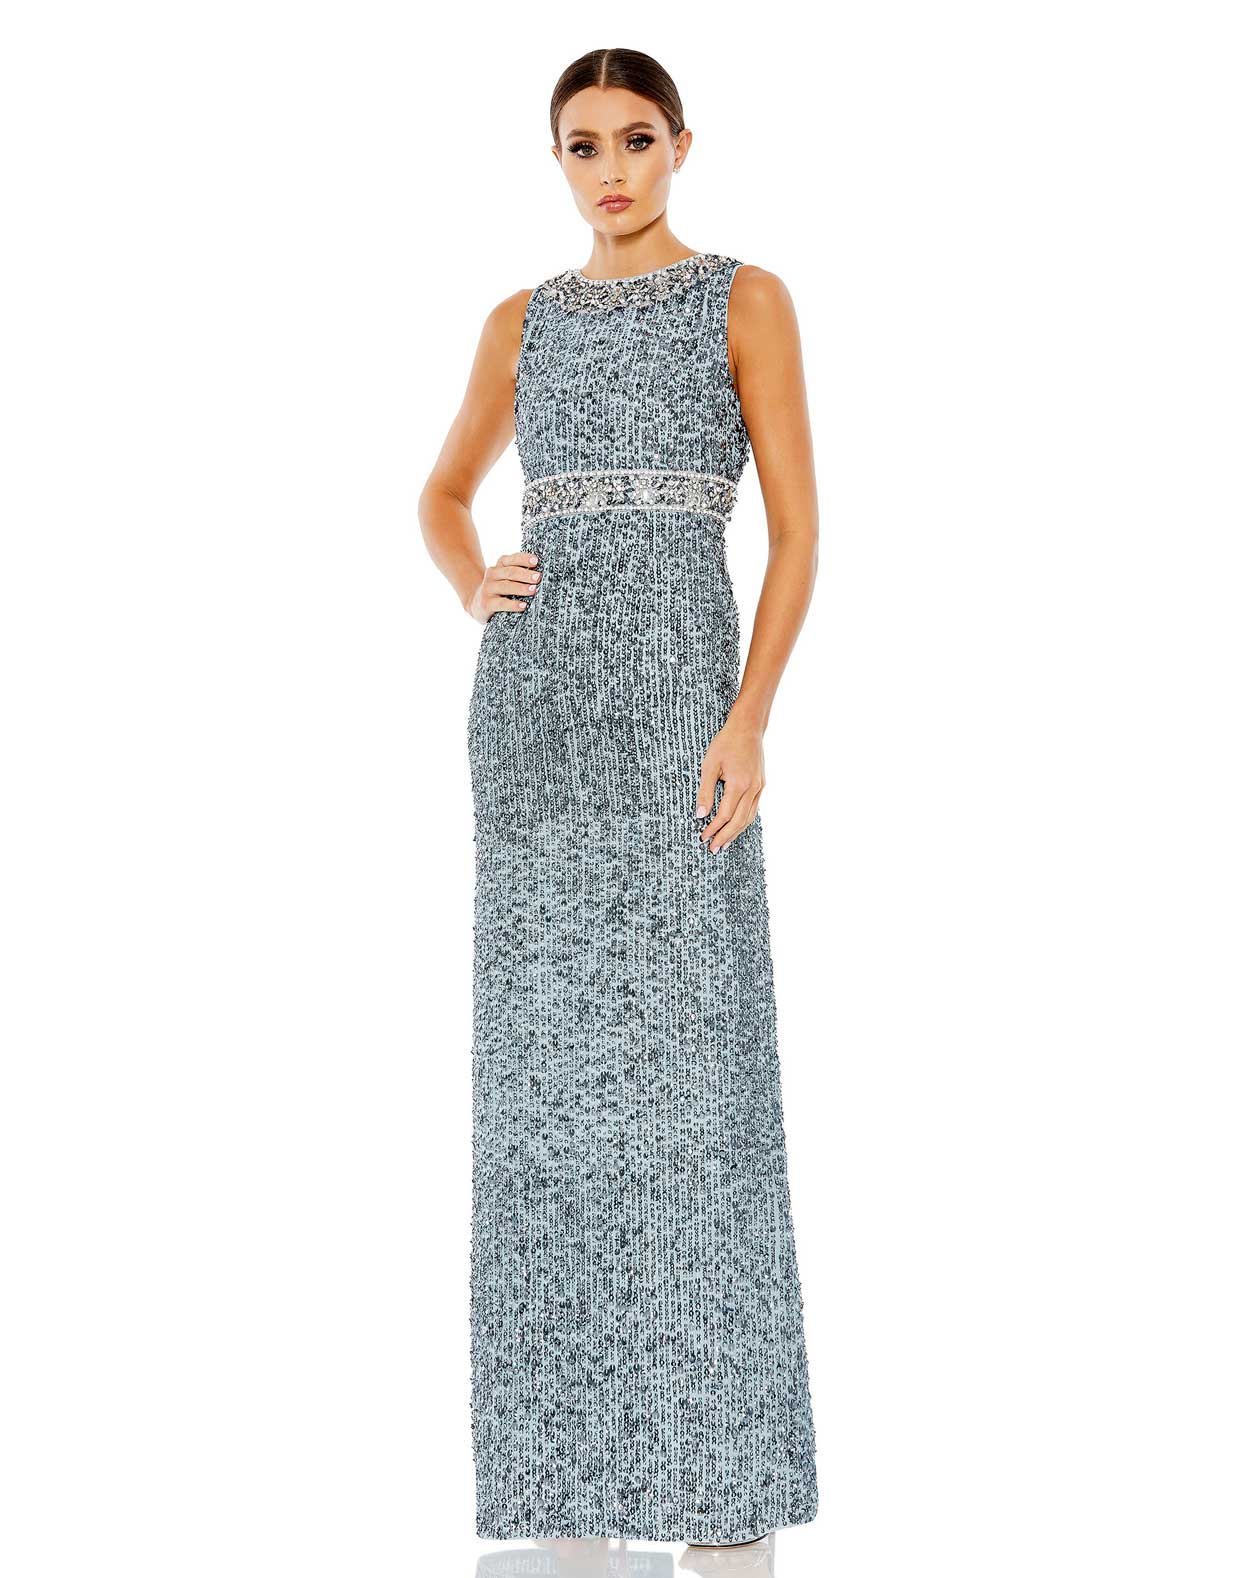 Sequined Sleeveless Embellished Neckline Gown